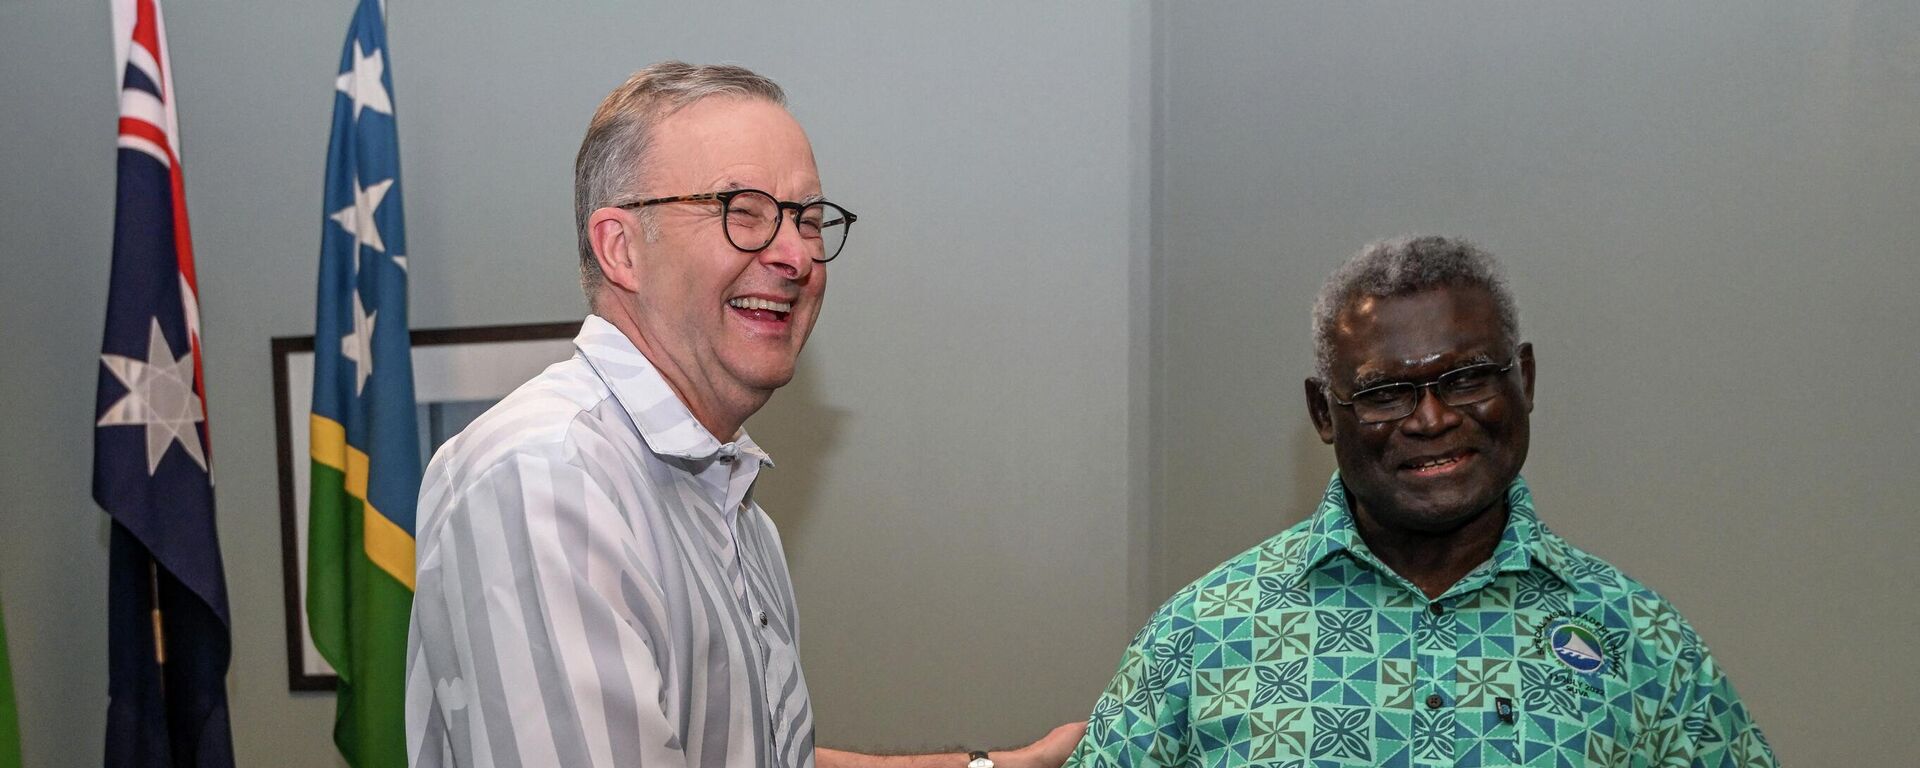 Australia's Prime Minister Anthony Albanese (L) greets Solomon Islands Prime Minister Manasseh Sogavare (R) during a bilateral meeting at the Pacific Islands Forum (PIF) in Suva on July 13, 2022 - Sputnik International, 1920, 14.07.2022